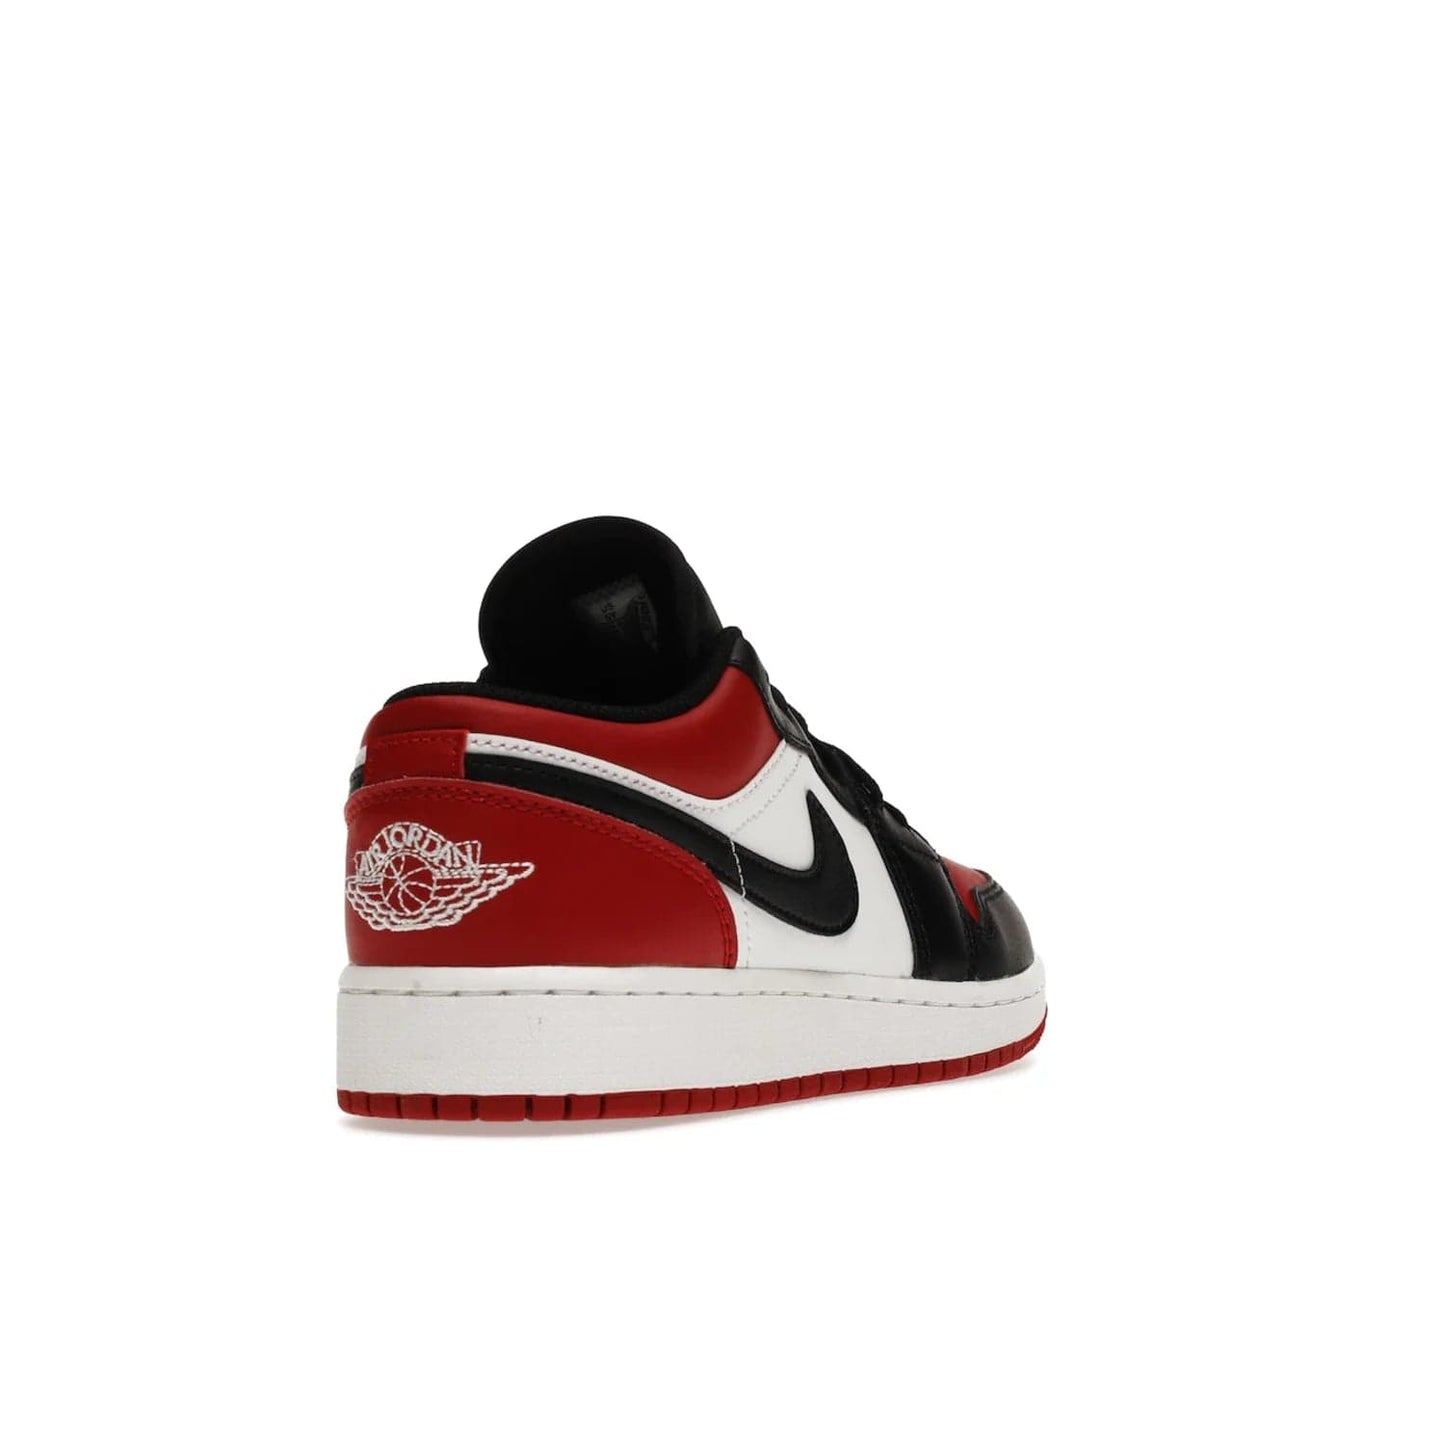 Jordan 1 Low Bred Toe (GS) - Image 31 - Only at www.BallersClubKickz.com - #
Iconic sneaker from Jordan brand with classic colorway, unique detailing & Air Jordan Wings logo. Step into the shoes of the greats with the Jordan 1 Low Bred Toe GS!